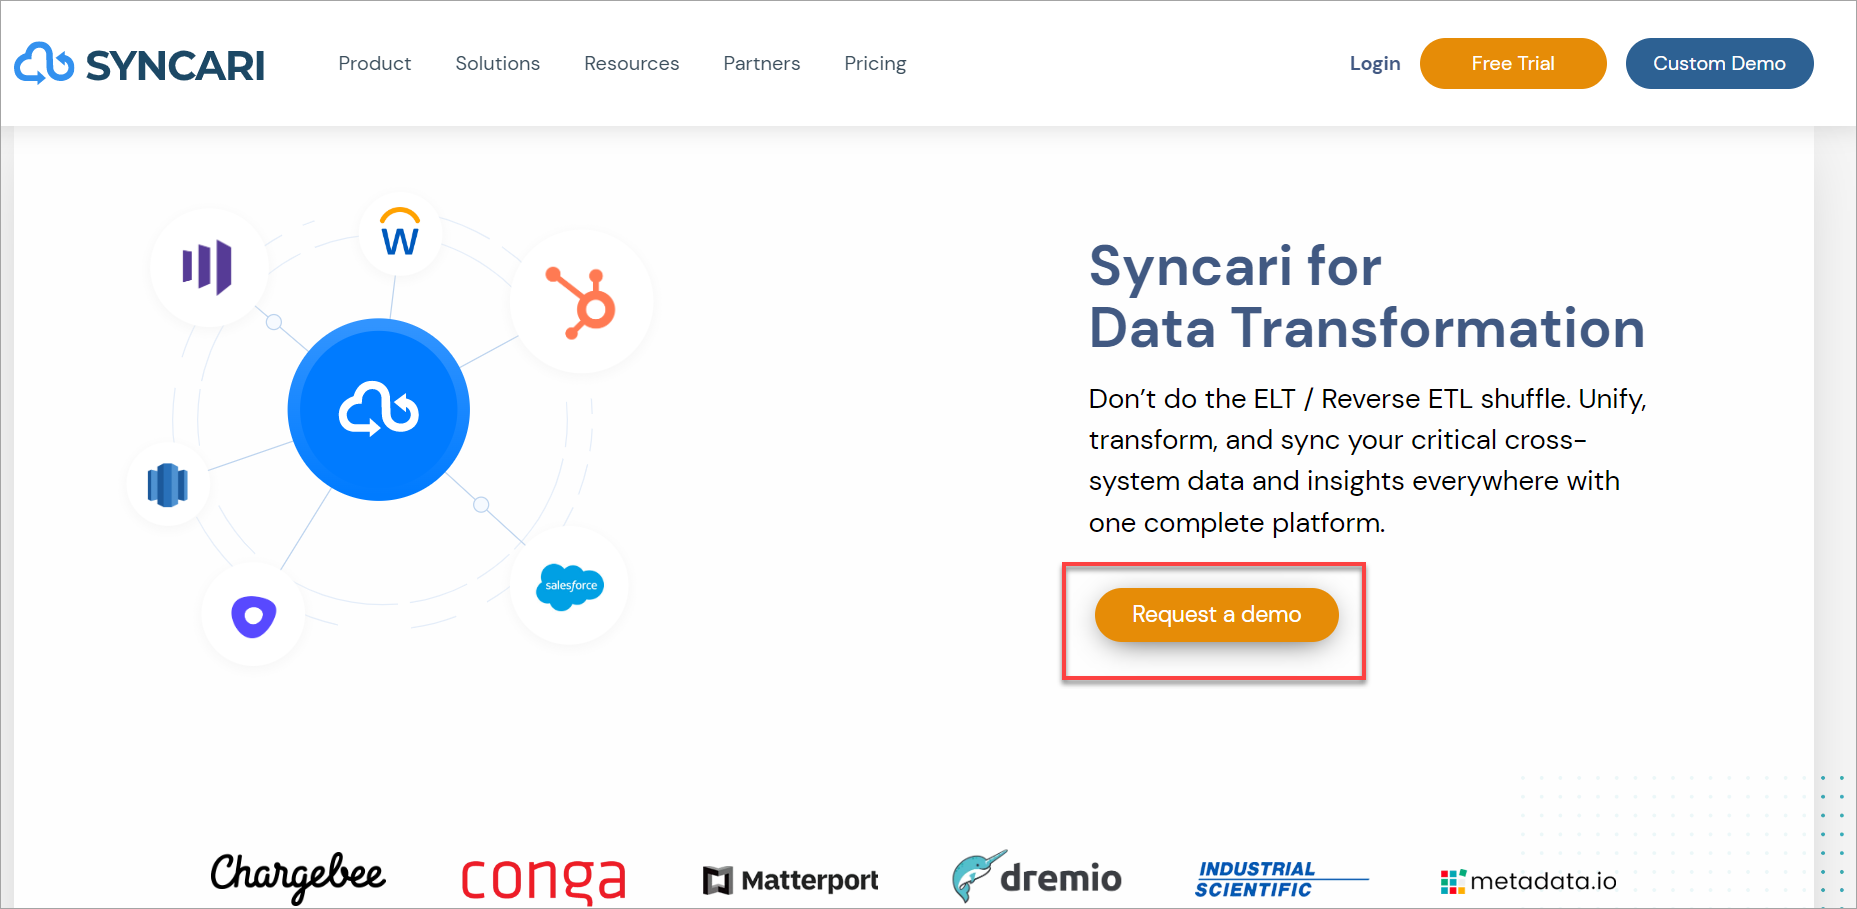 Every data source connected to Syncari normalizes the product's data model thanks to its centralized data architecture. Now, any customer system may communicate using the same data language.